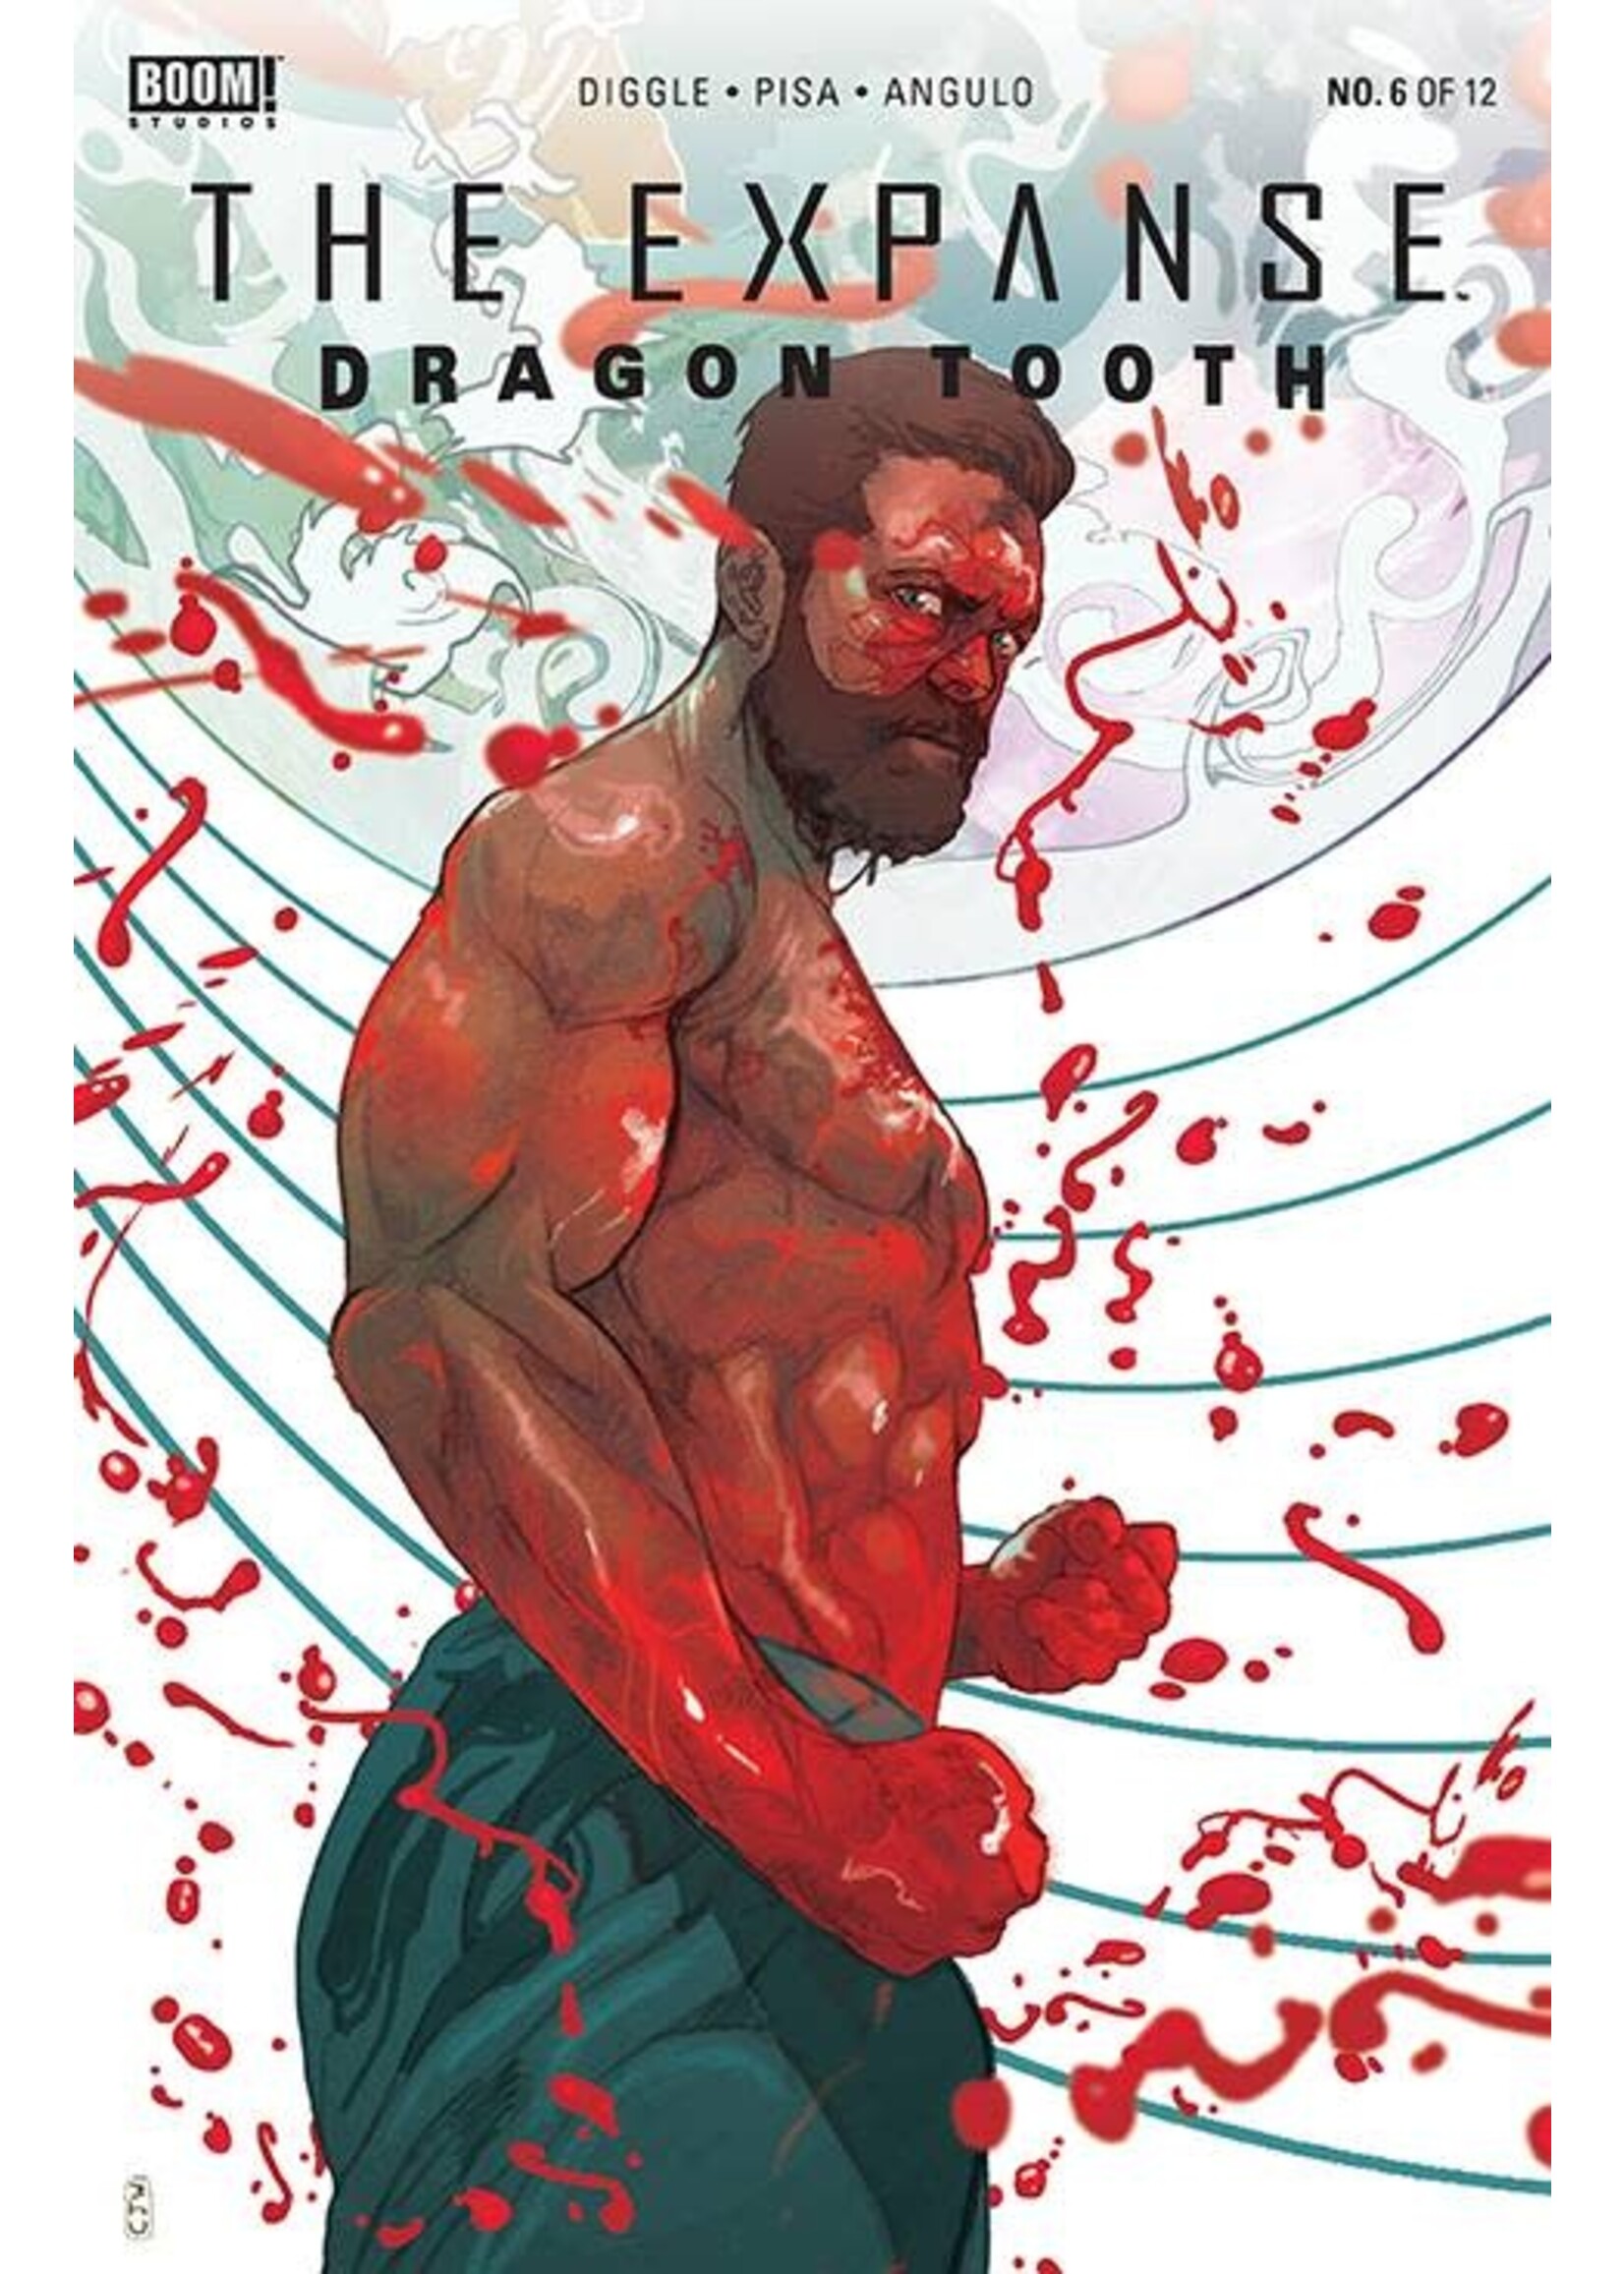 BOOM! STUDIOS EXPANSE THE DRAGON TOOTH #6 (OF 12) CVR A WARD